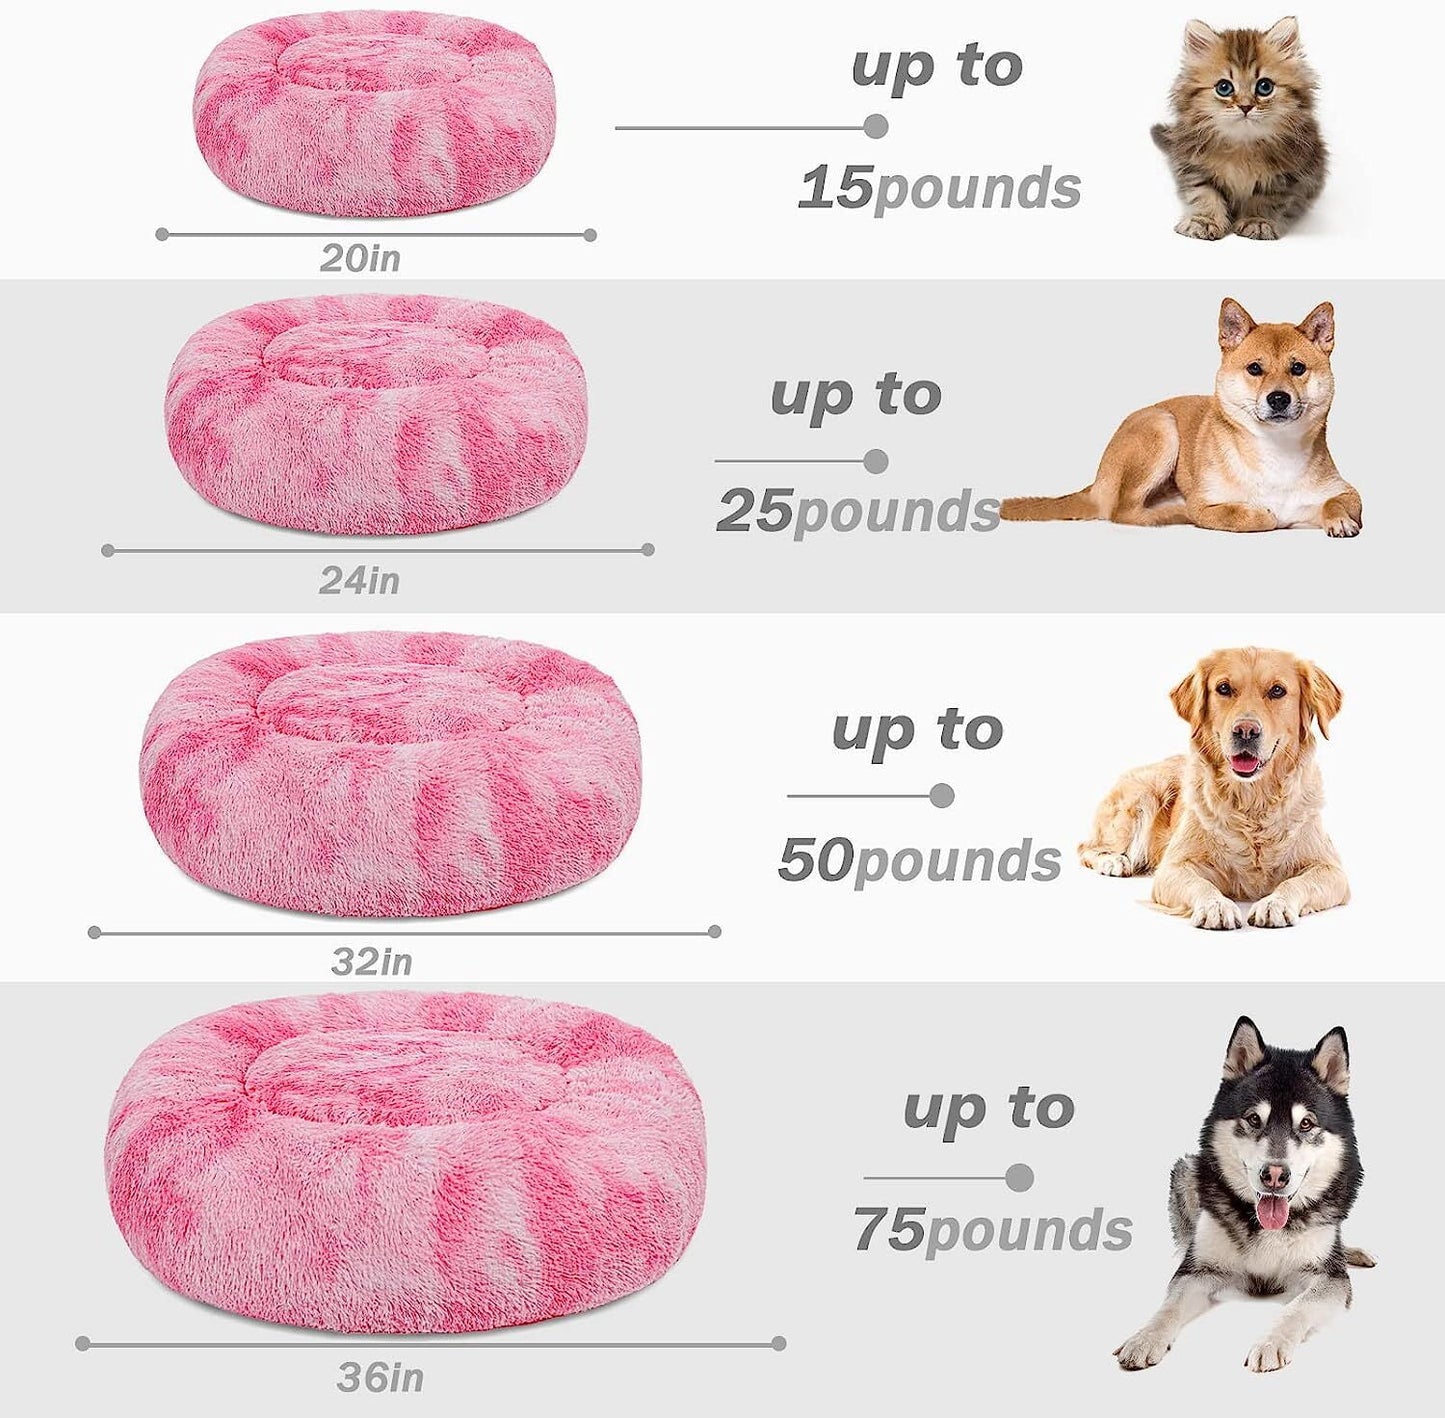 Exclusivo Mezcla Calming Donut Dog Bed Cat Bed for Small Medium Large Dogs and Cats Anti-Anxiety Plush Soft and Cozy Cat Bed Warming Pet Bed for Winter and Fall (20IN, Gradient Pink)